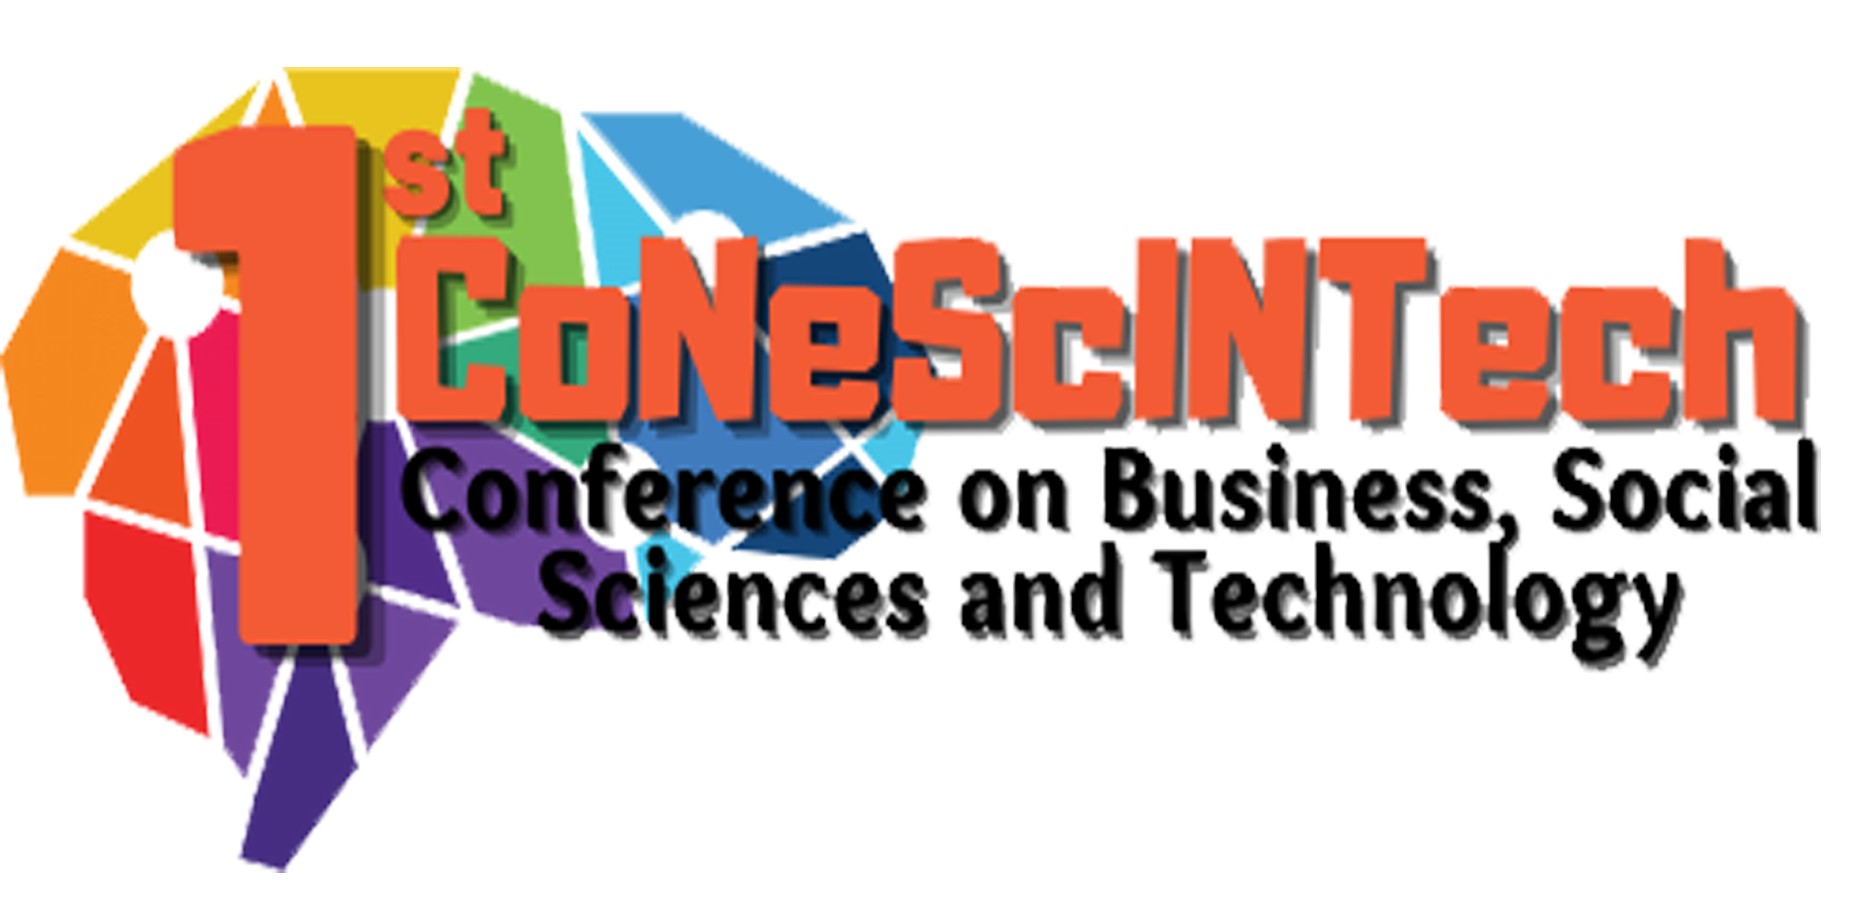 					View Vol. 1 No. 1 (2021): Conference on Business, Social Sciences and Technology (CoNeScINTech)
				